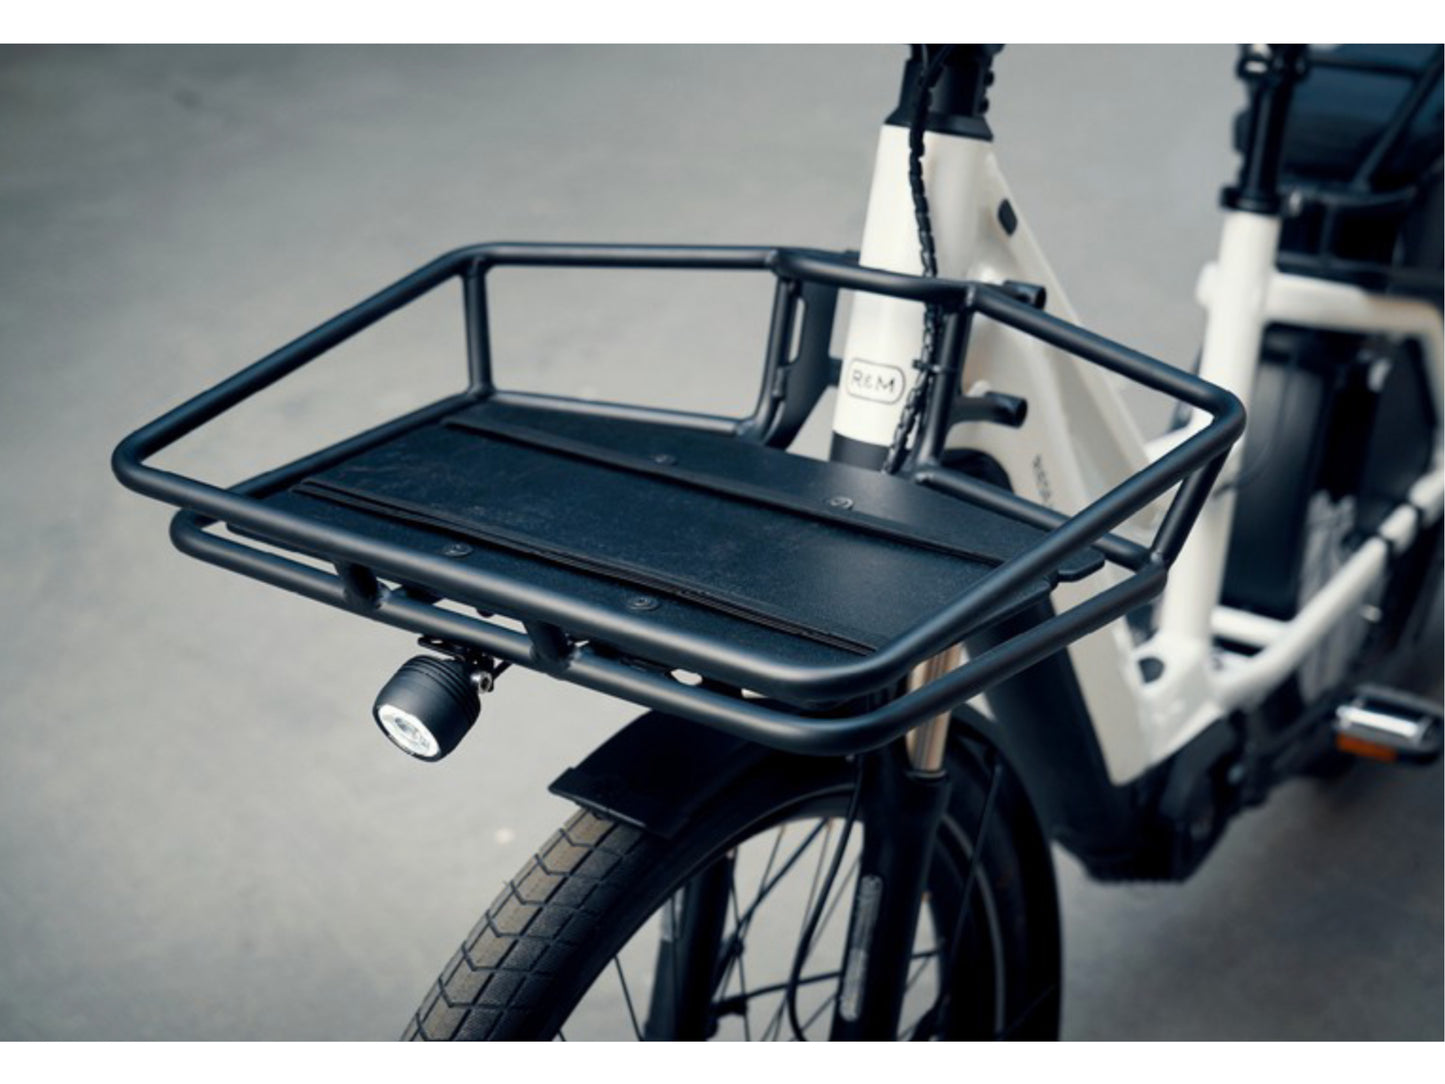 Riese and Muller Multicharger Mixte GT Rohloff emtb hardtail close up front cargo carrier option